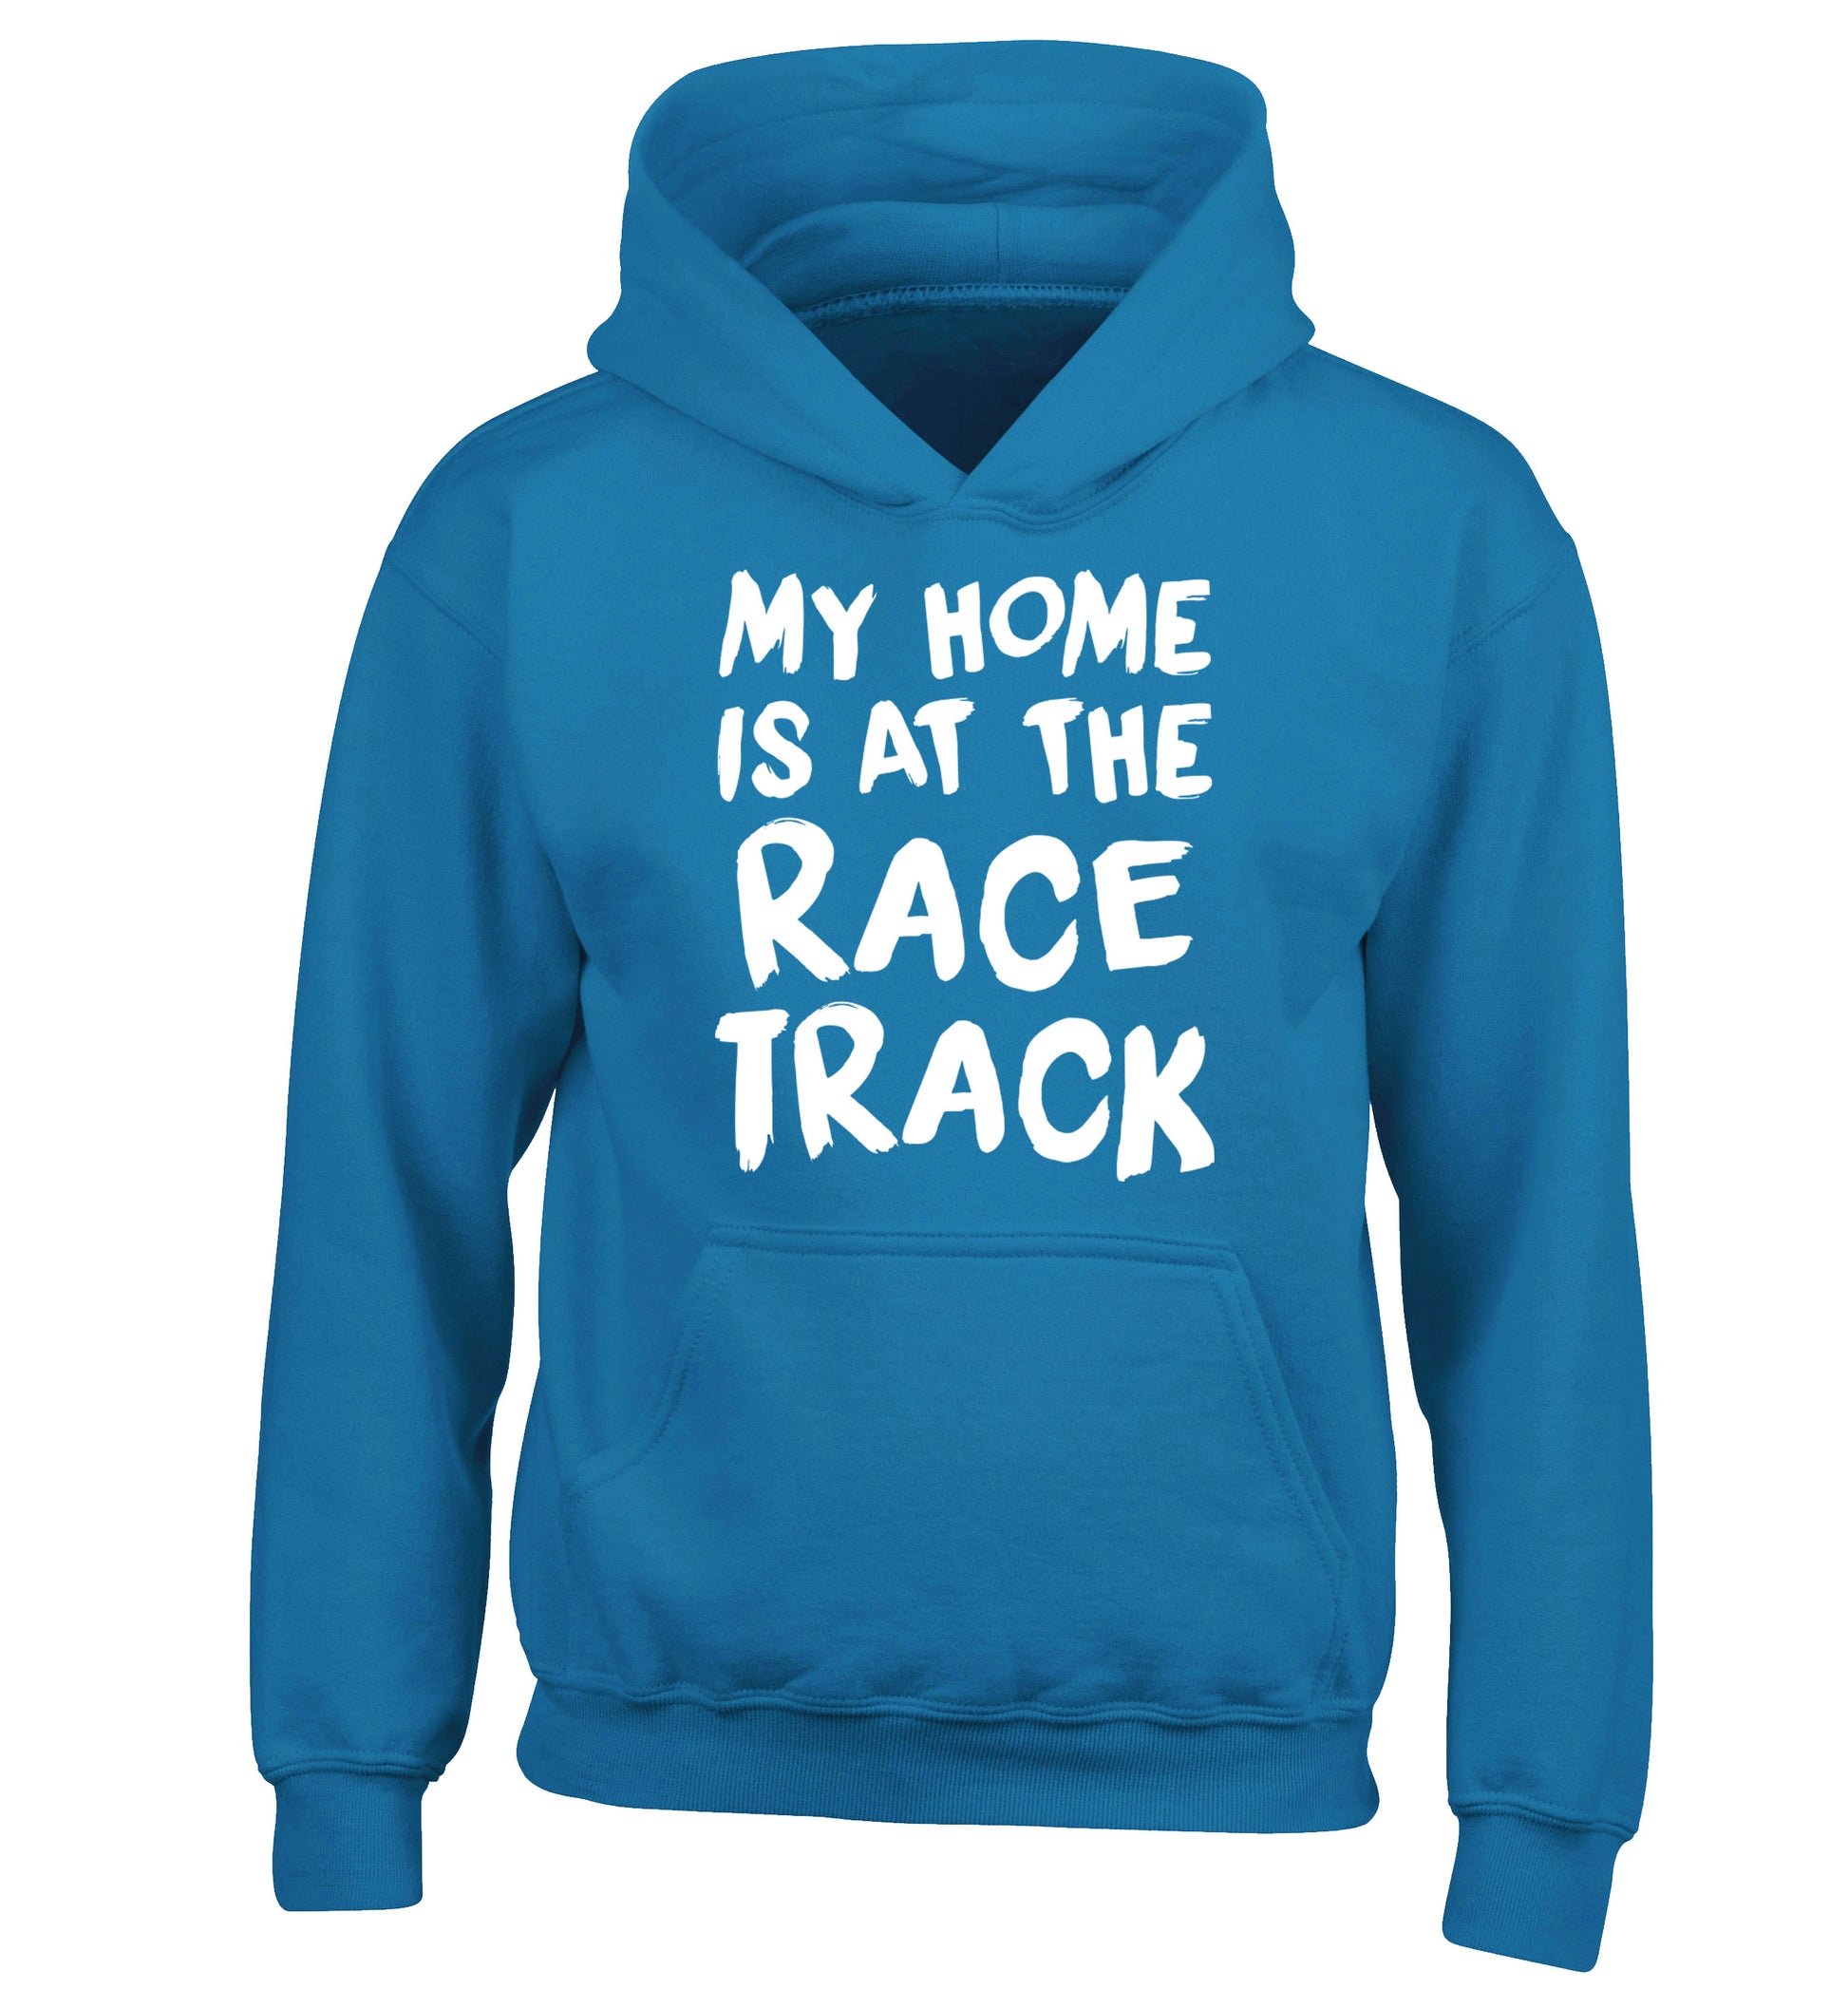 My home is at the race track children's blue hoodie 12-14 Years